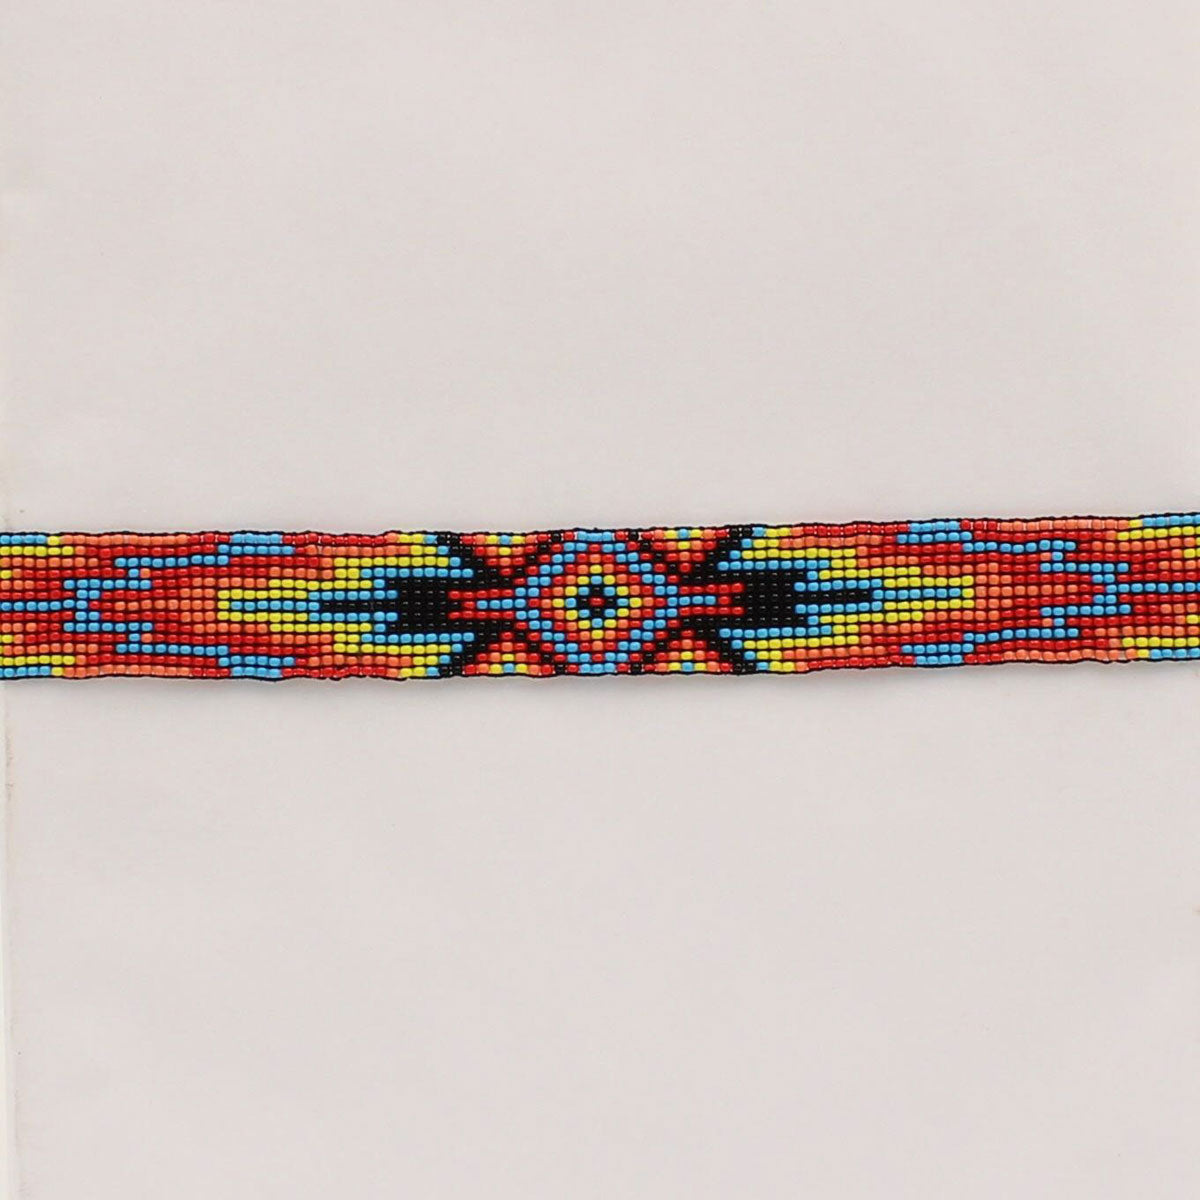 TWISTER BEADED STRETCH HATBAND - MULTICOLOR